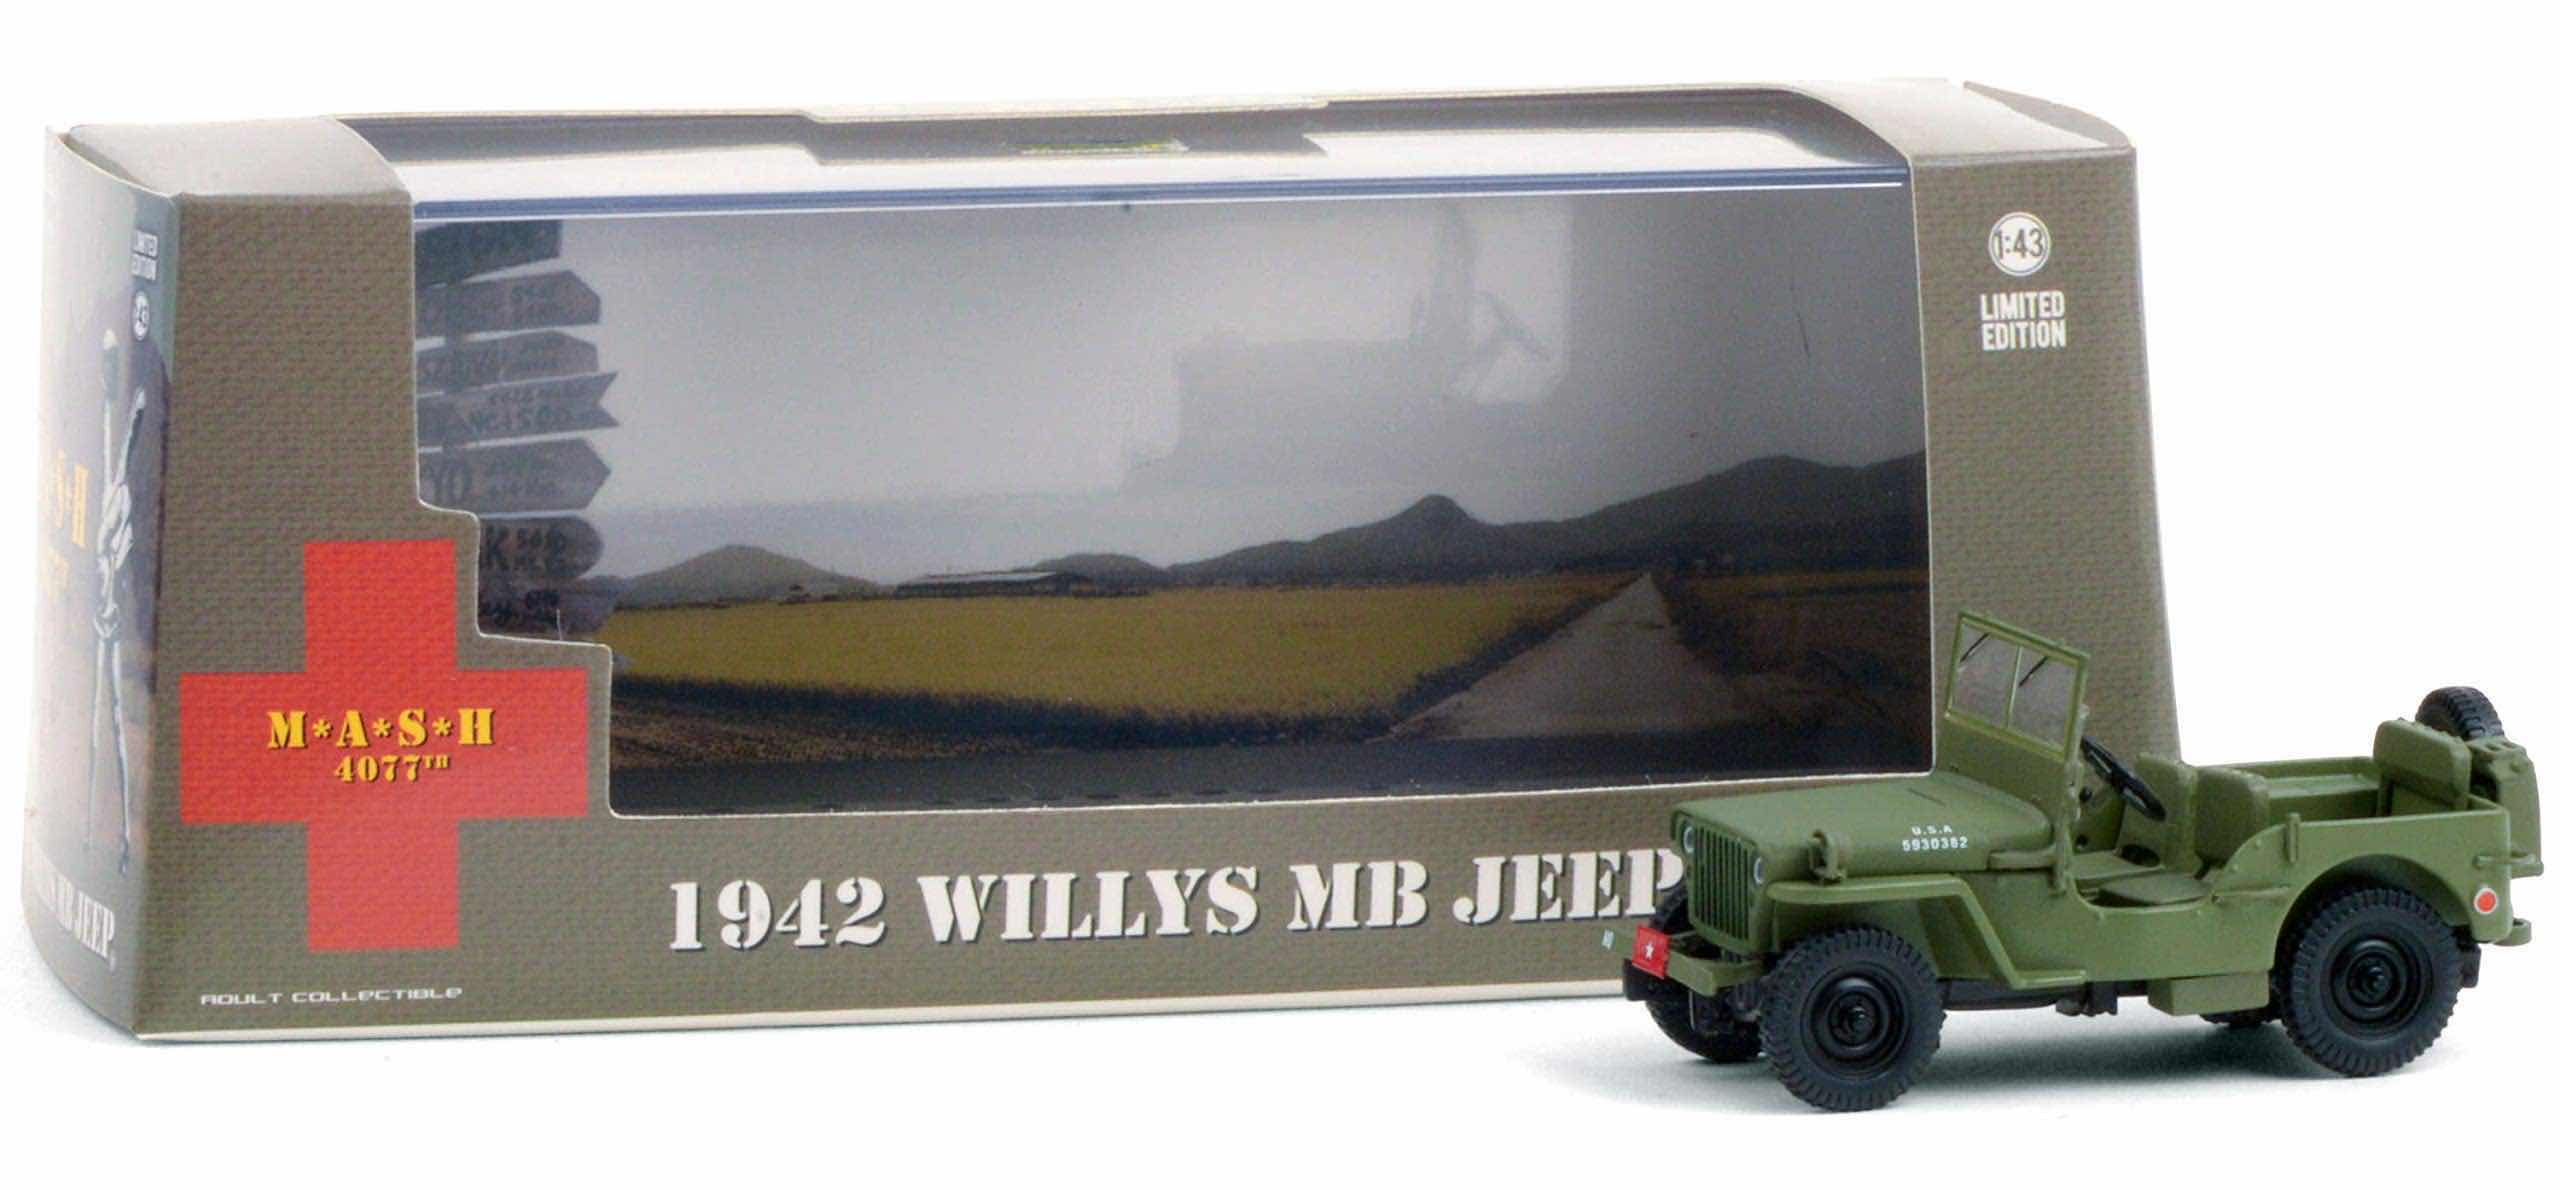 Photo 1 of NEW GREENLIGHT COLLECTIBLES HOLLYWOOD LIMITED EDITION 1:43 SCALE DIE-CAST VEHICLE, M*A*S*H 4077TH 1952 WILLYS M38 A1 JEEP 